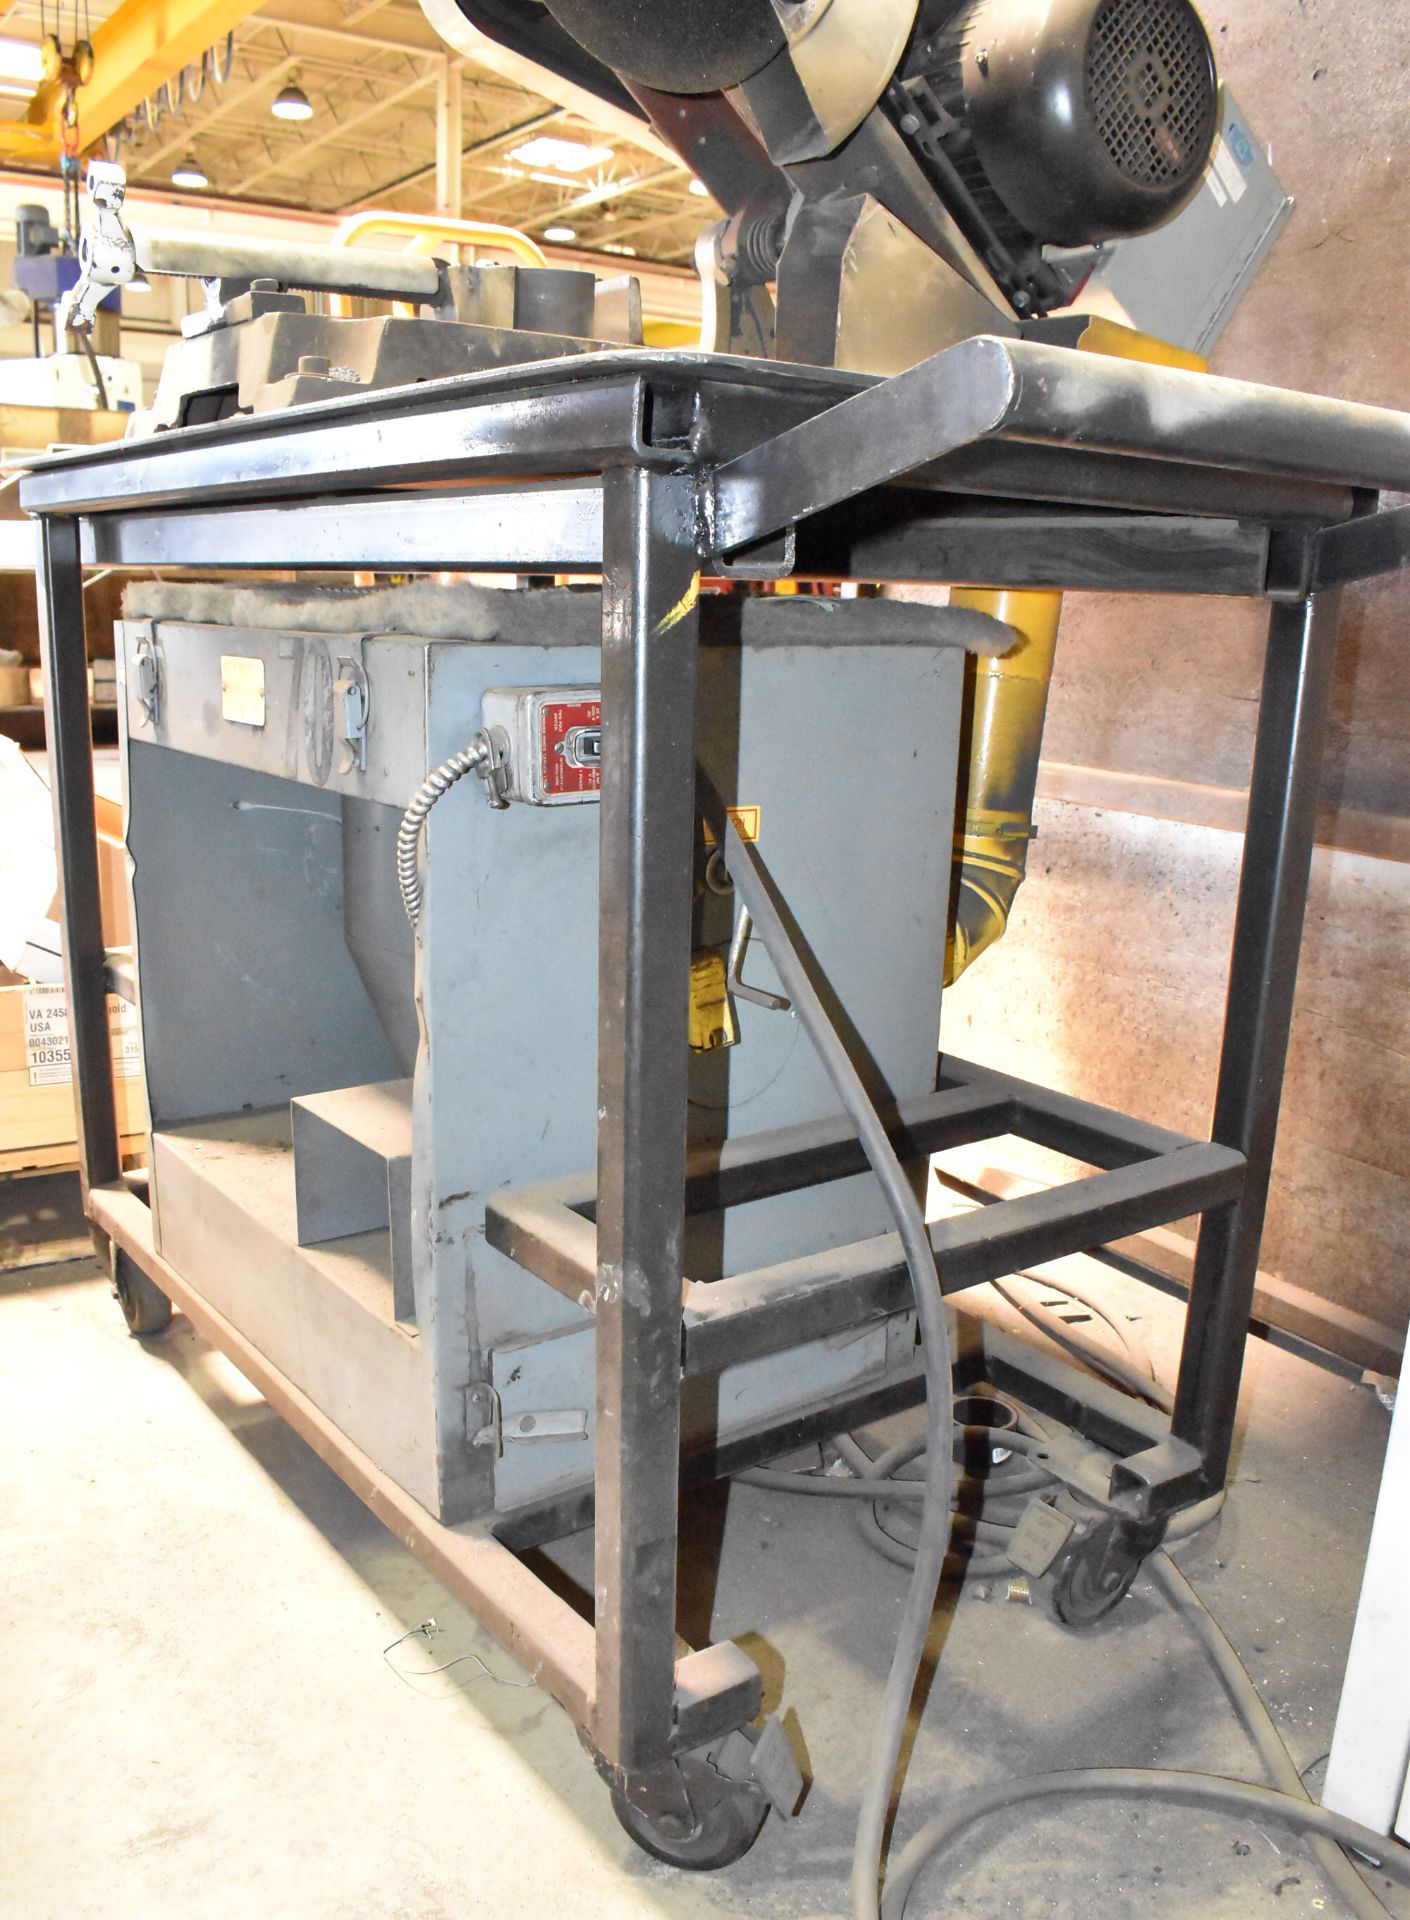 KBC 14" HEAVY DUTY ABRASIVE CUT OFF SAW WITH CART AND DUST COLLECT BOX UNIT, S/N: N/A - Image 5 of 9